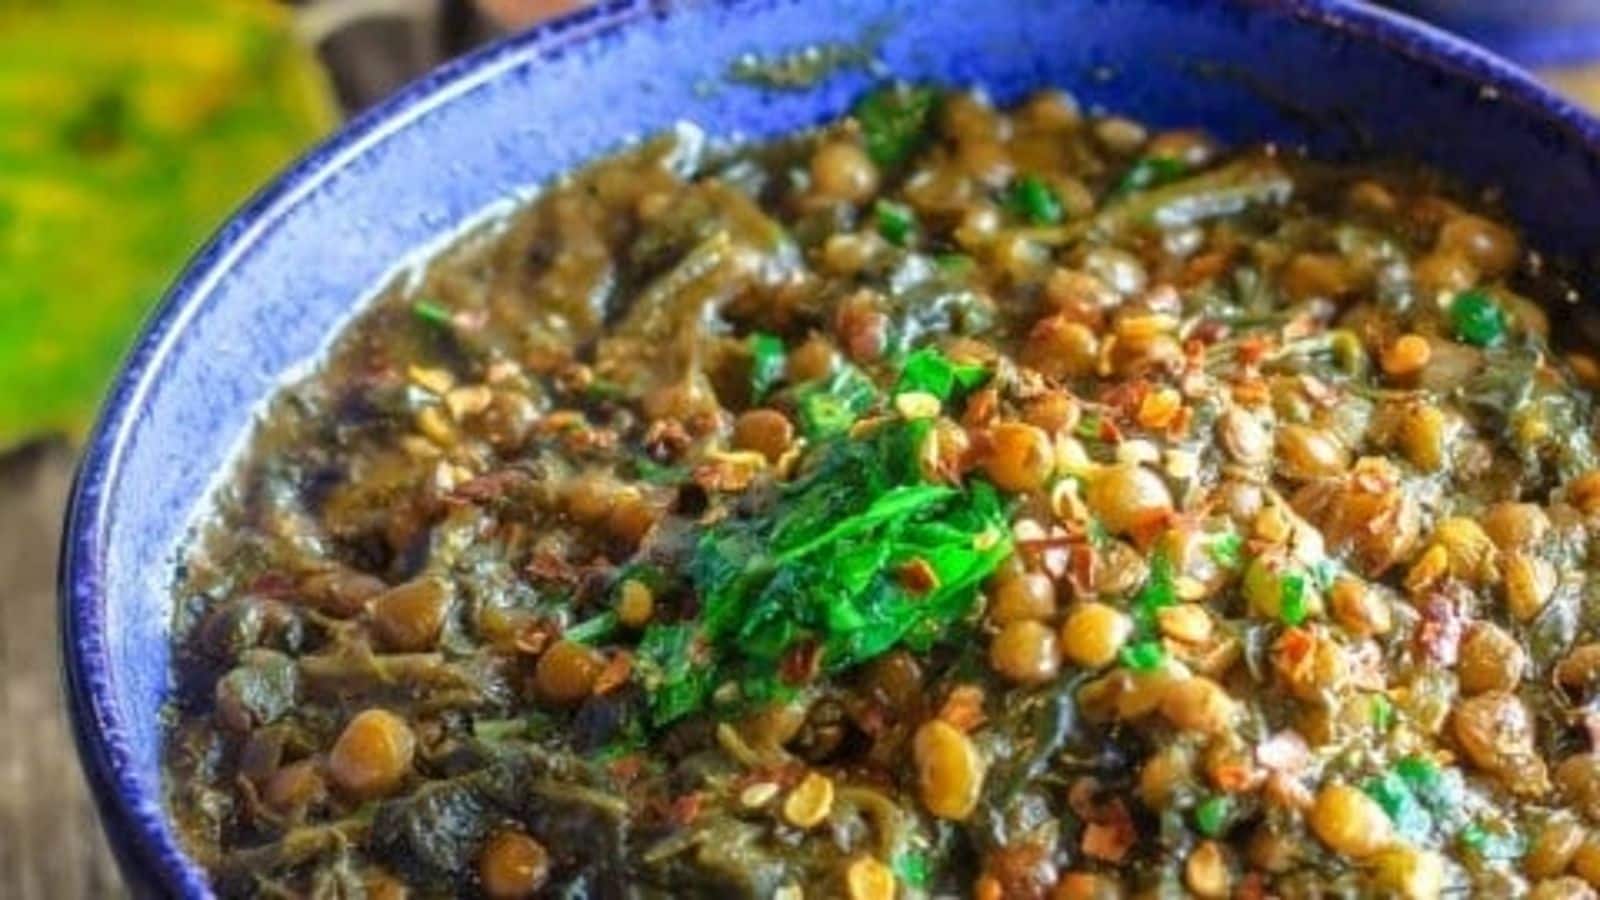 Check out this Lebanese lentil spinach soup recipe